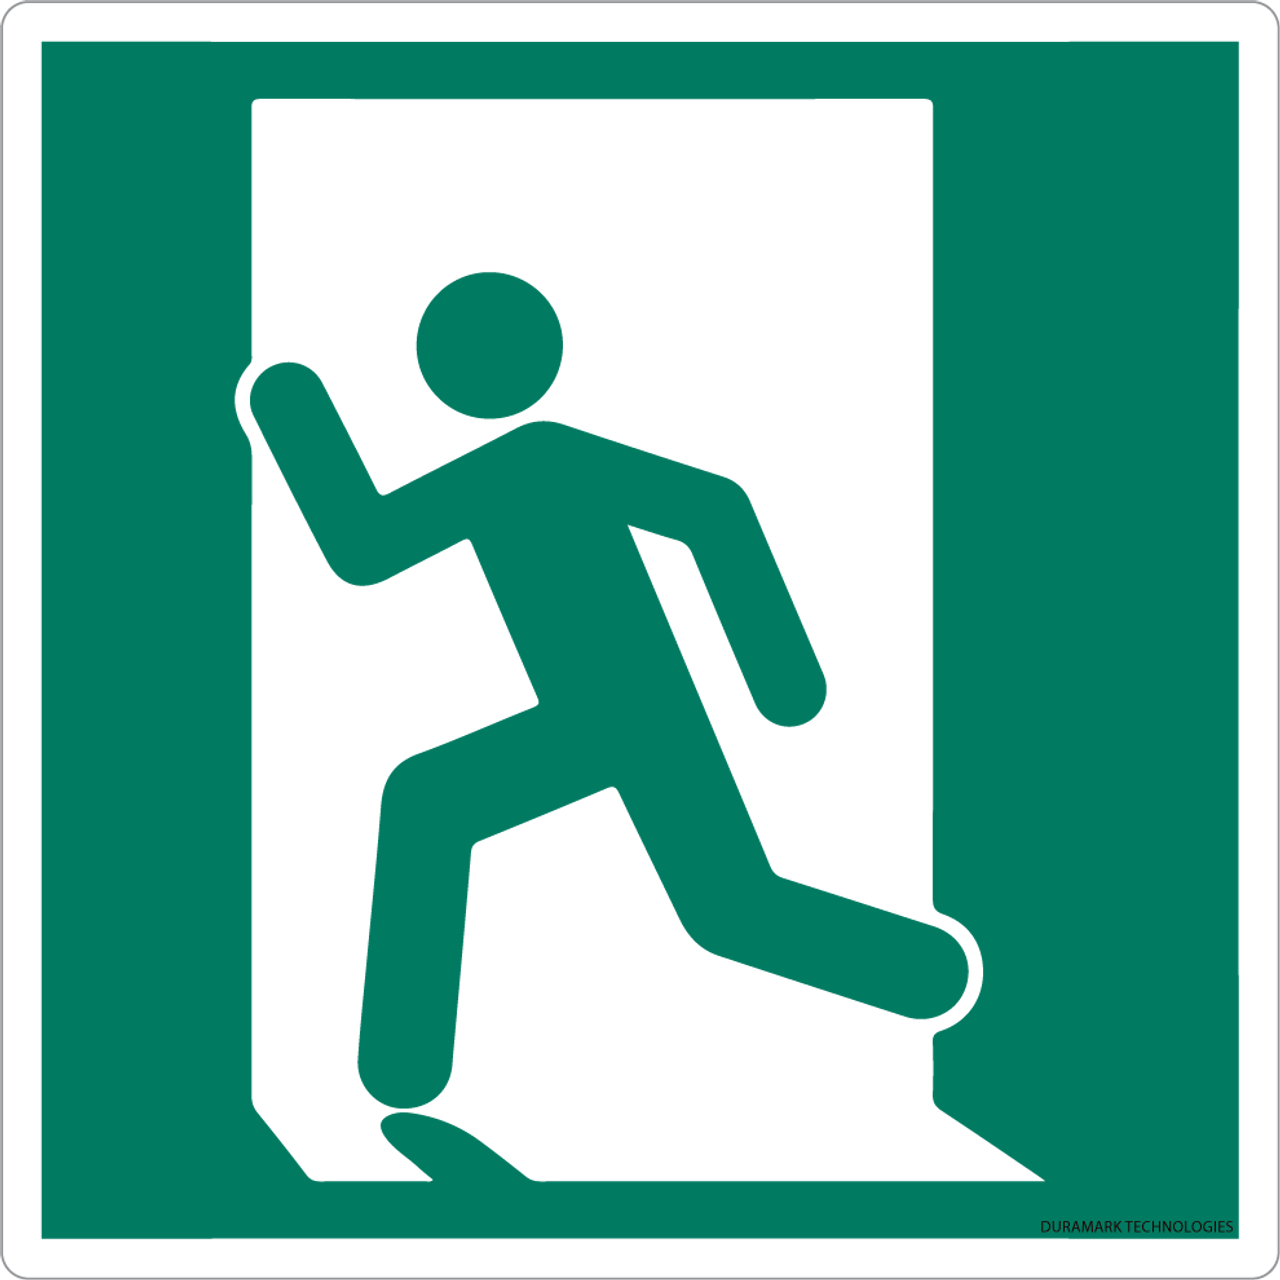 emergency exit sign png